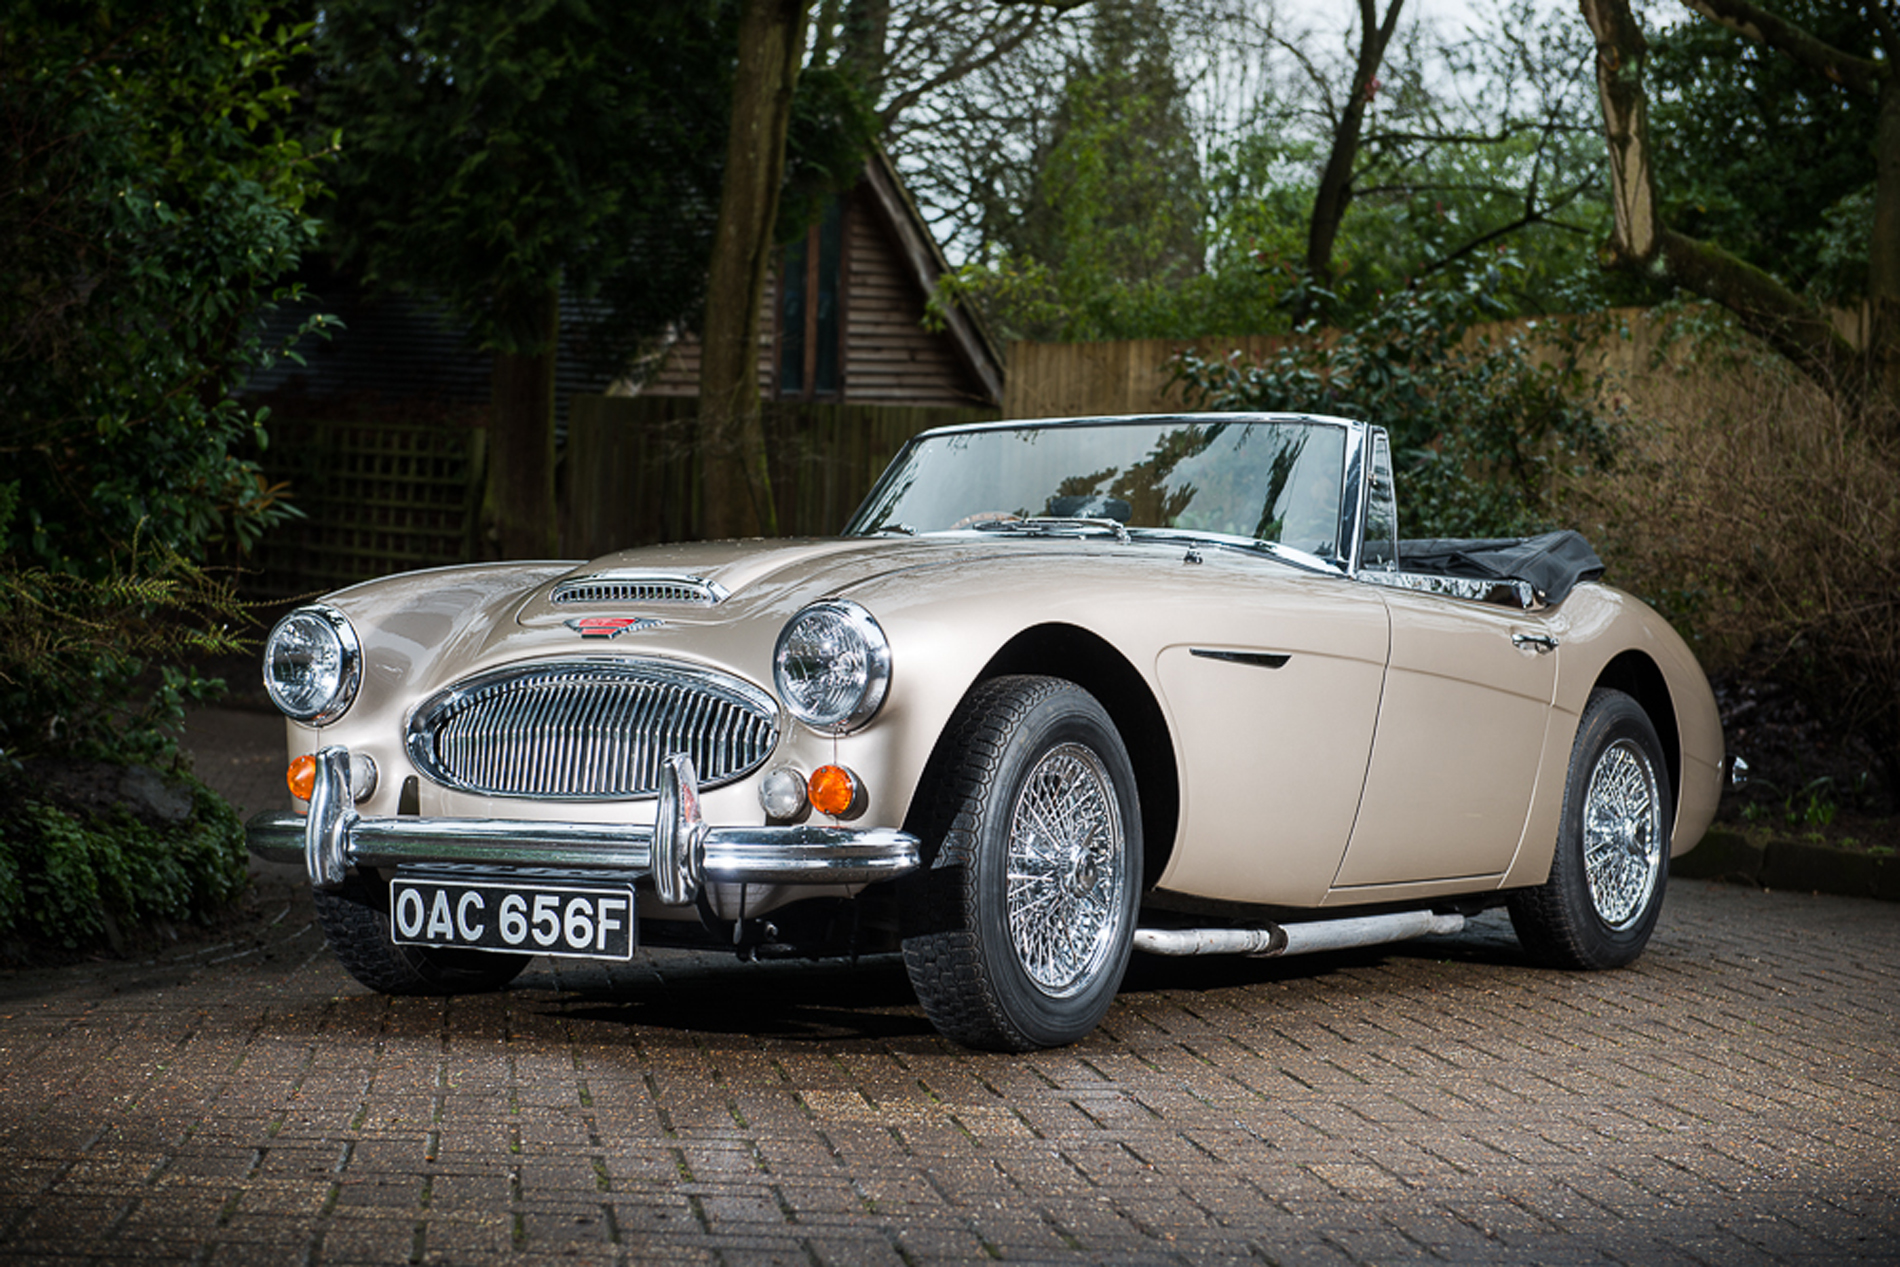 The last Big Healey ever made joins CCA sale